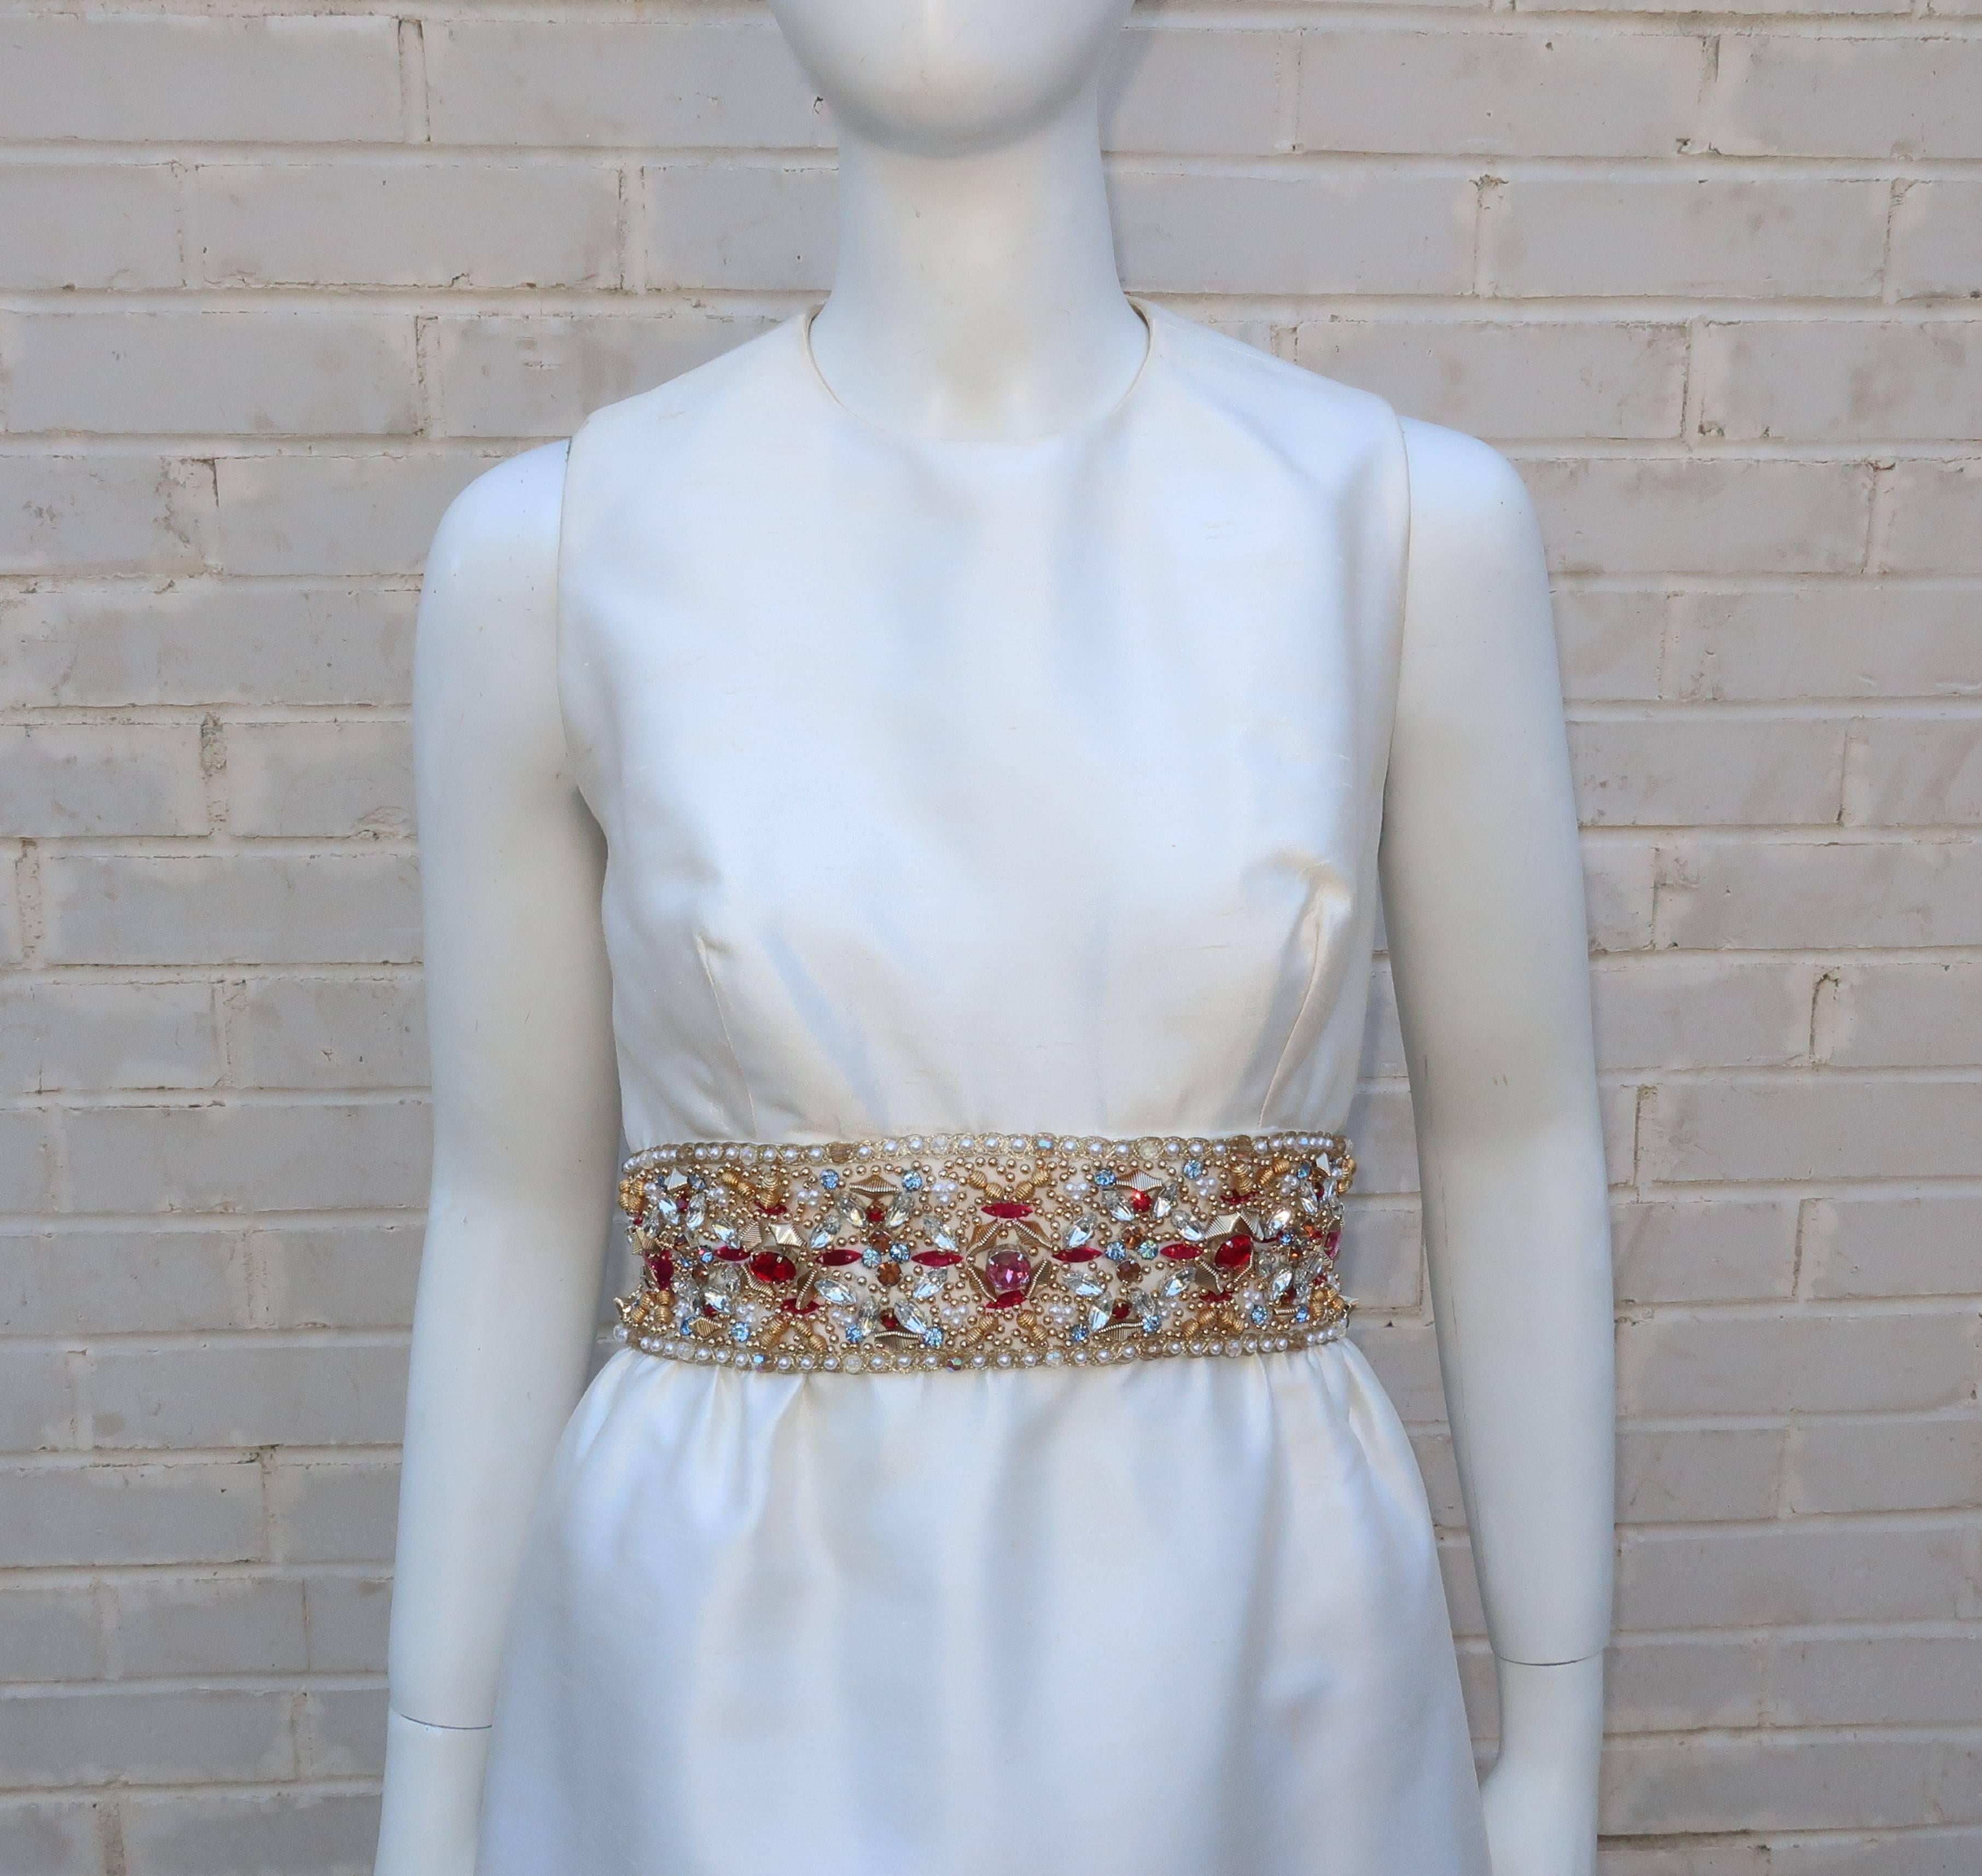 Prepare to be bedazzled!  This 1960's Kent Originals evening dress in a crisp white dupioni fabric is a classic 1960's empire waist silhouette with a couple of eye catching features.  First and foremost is the dazzling embellished empire waist with